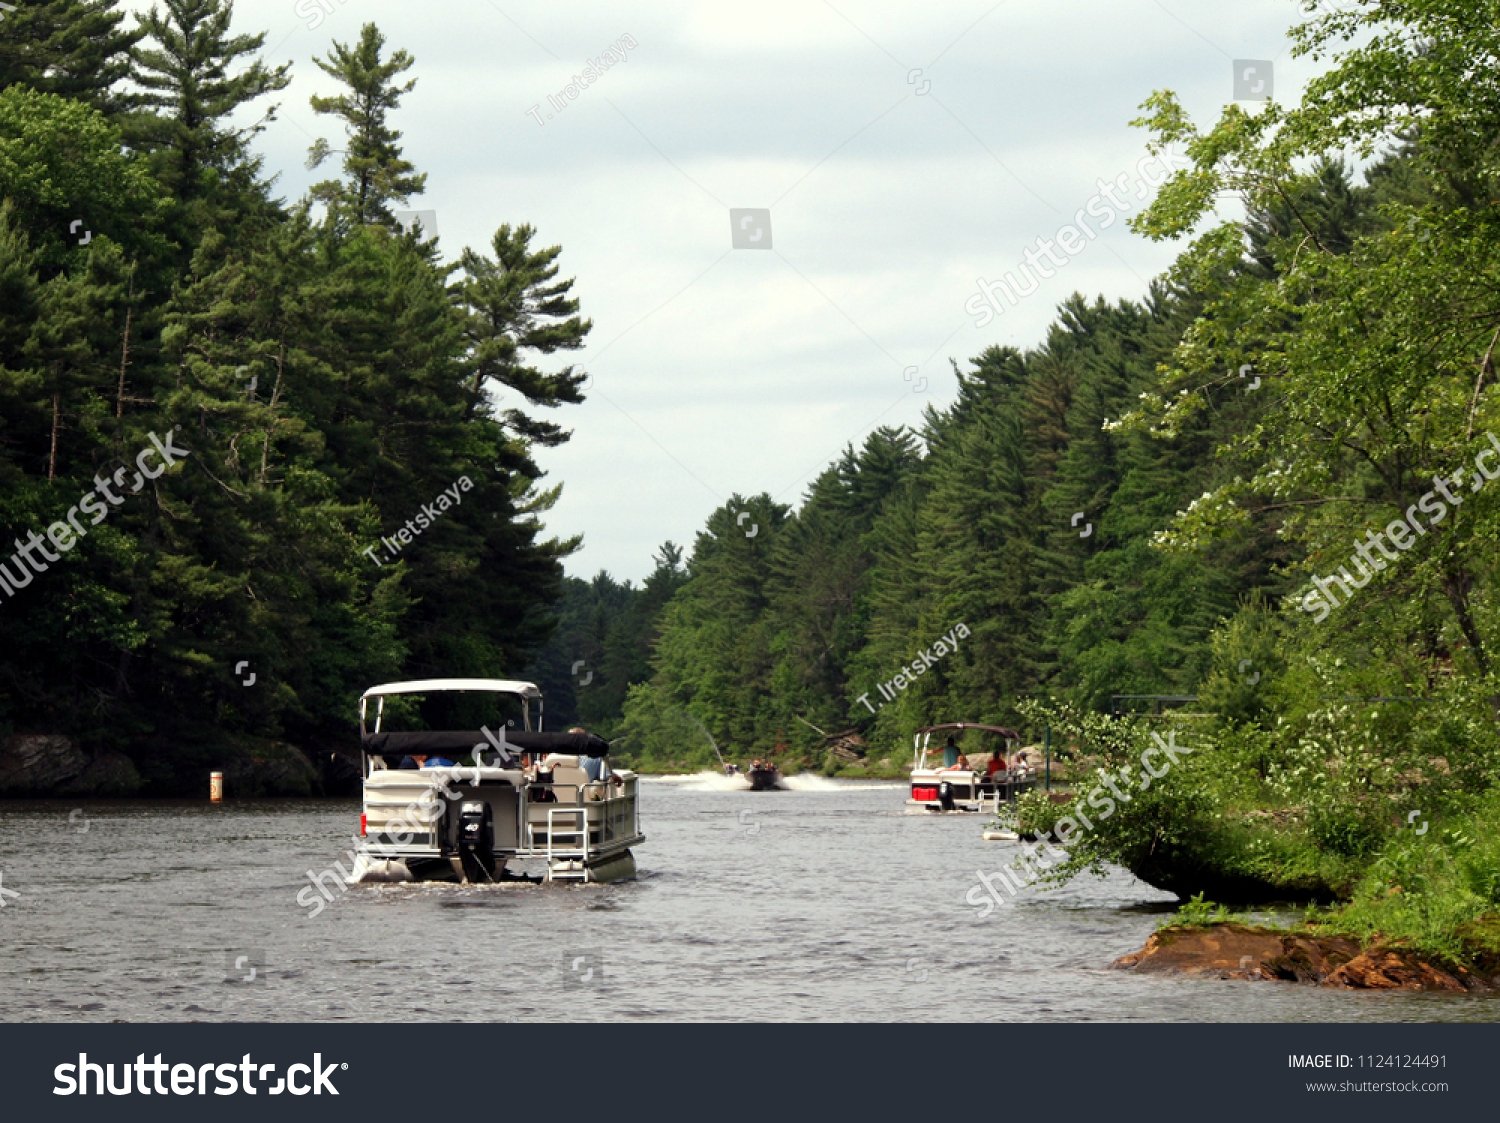 Boating at the Wisconsin river (USA) - Upper Dells part. Landscape and other recreational boats visible. #1124124491